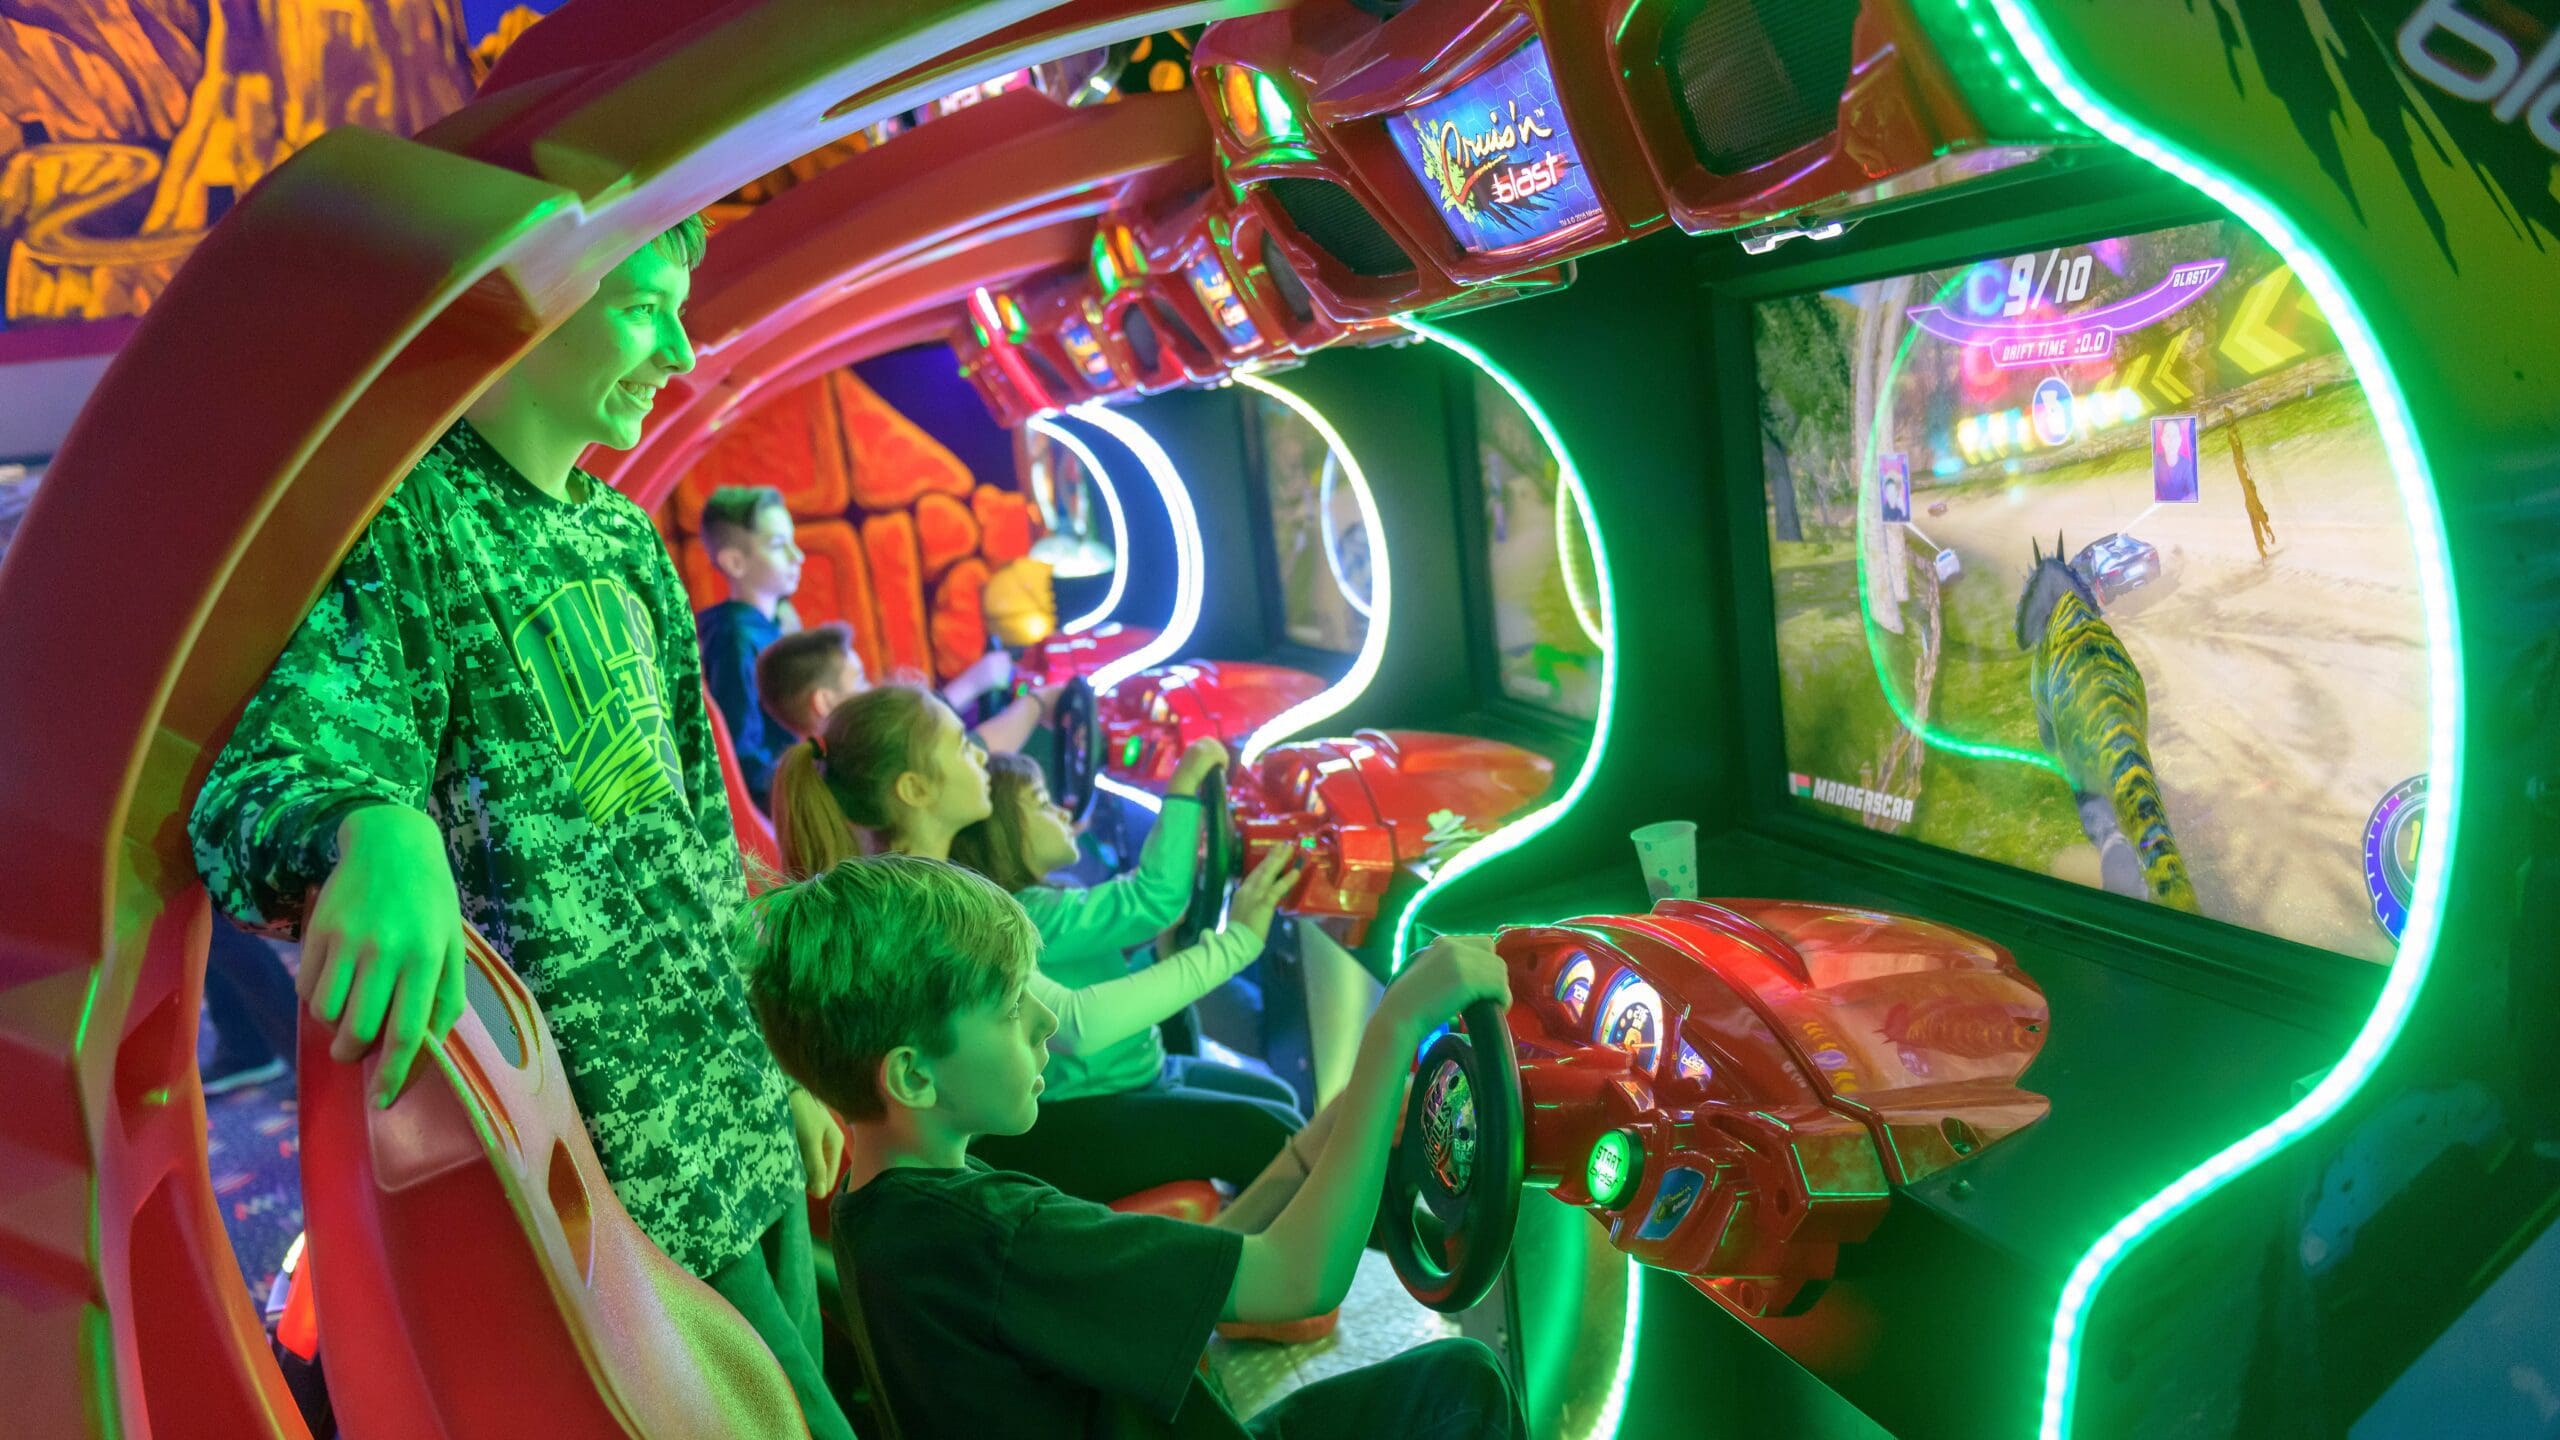 Kids enjoying gaming together in a vibrant game room setting.